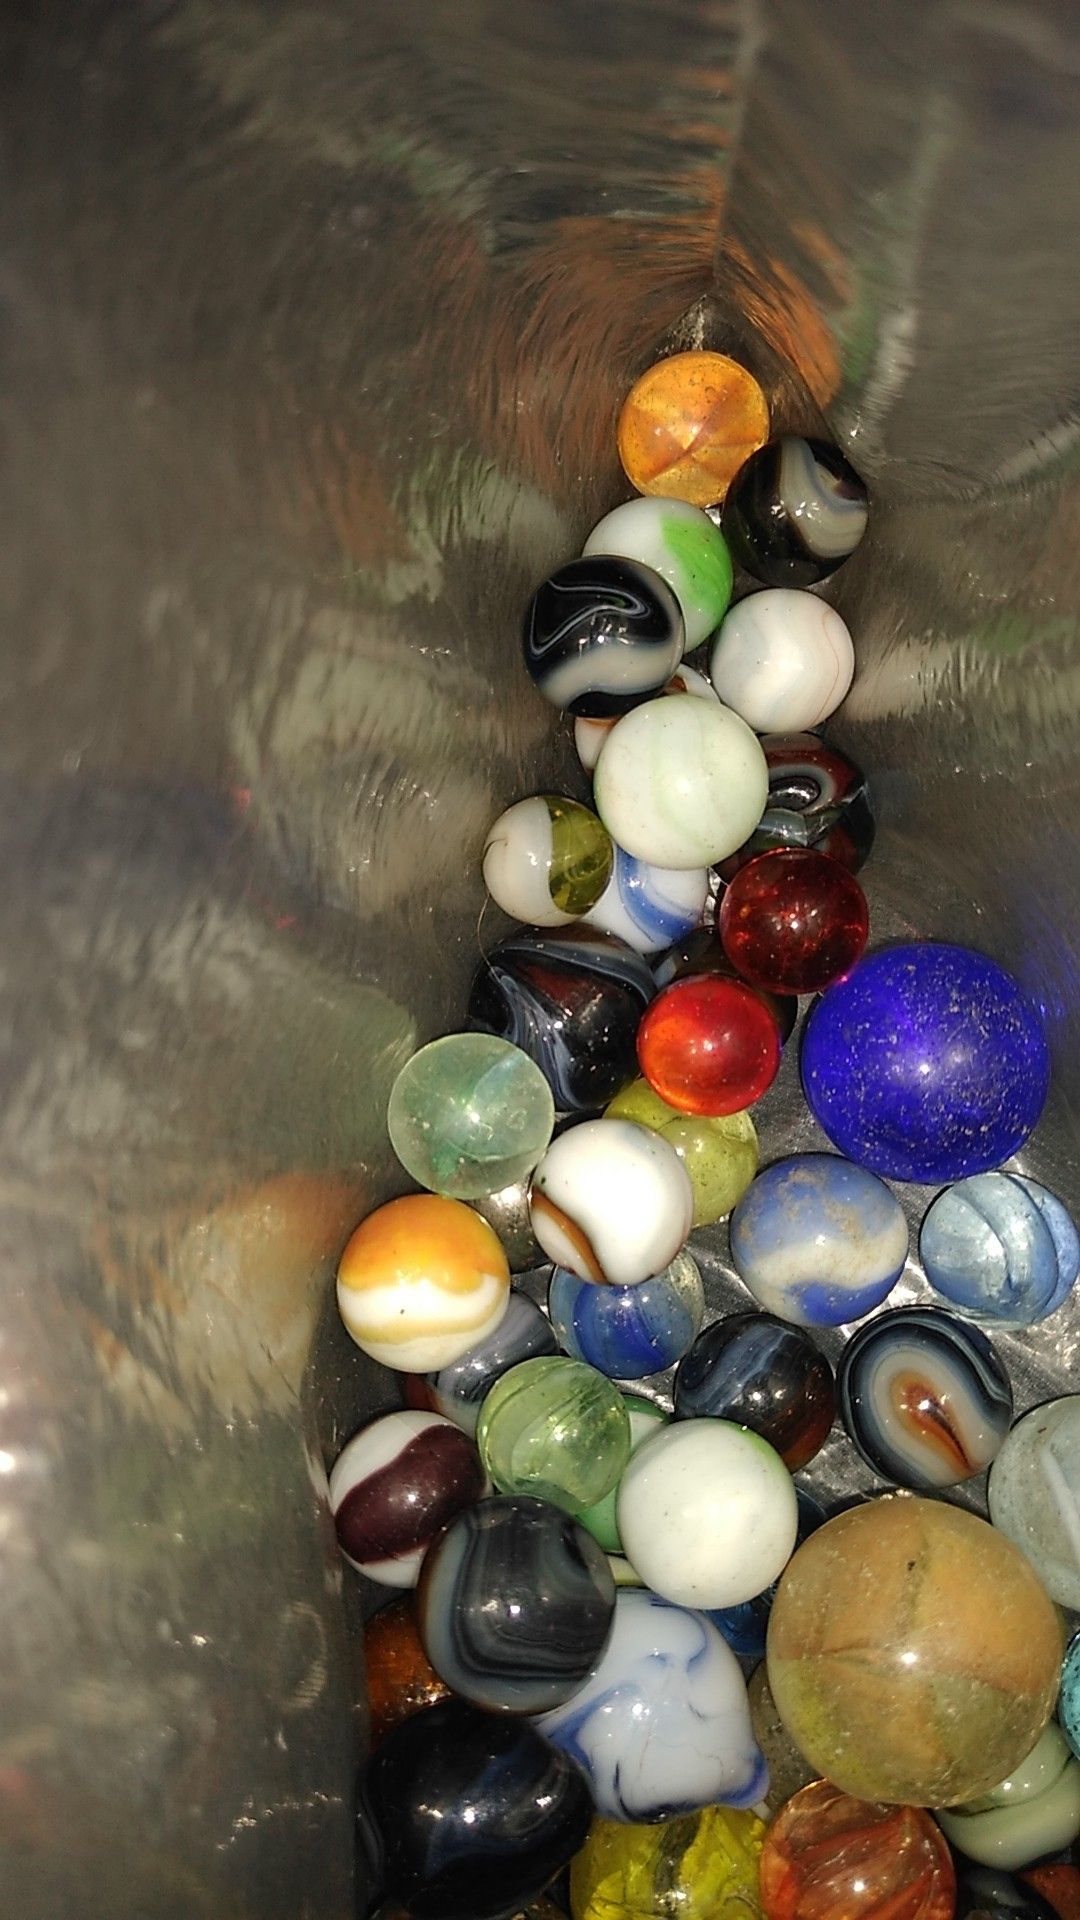 Mixture of old marbles